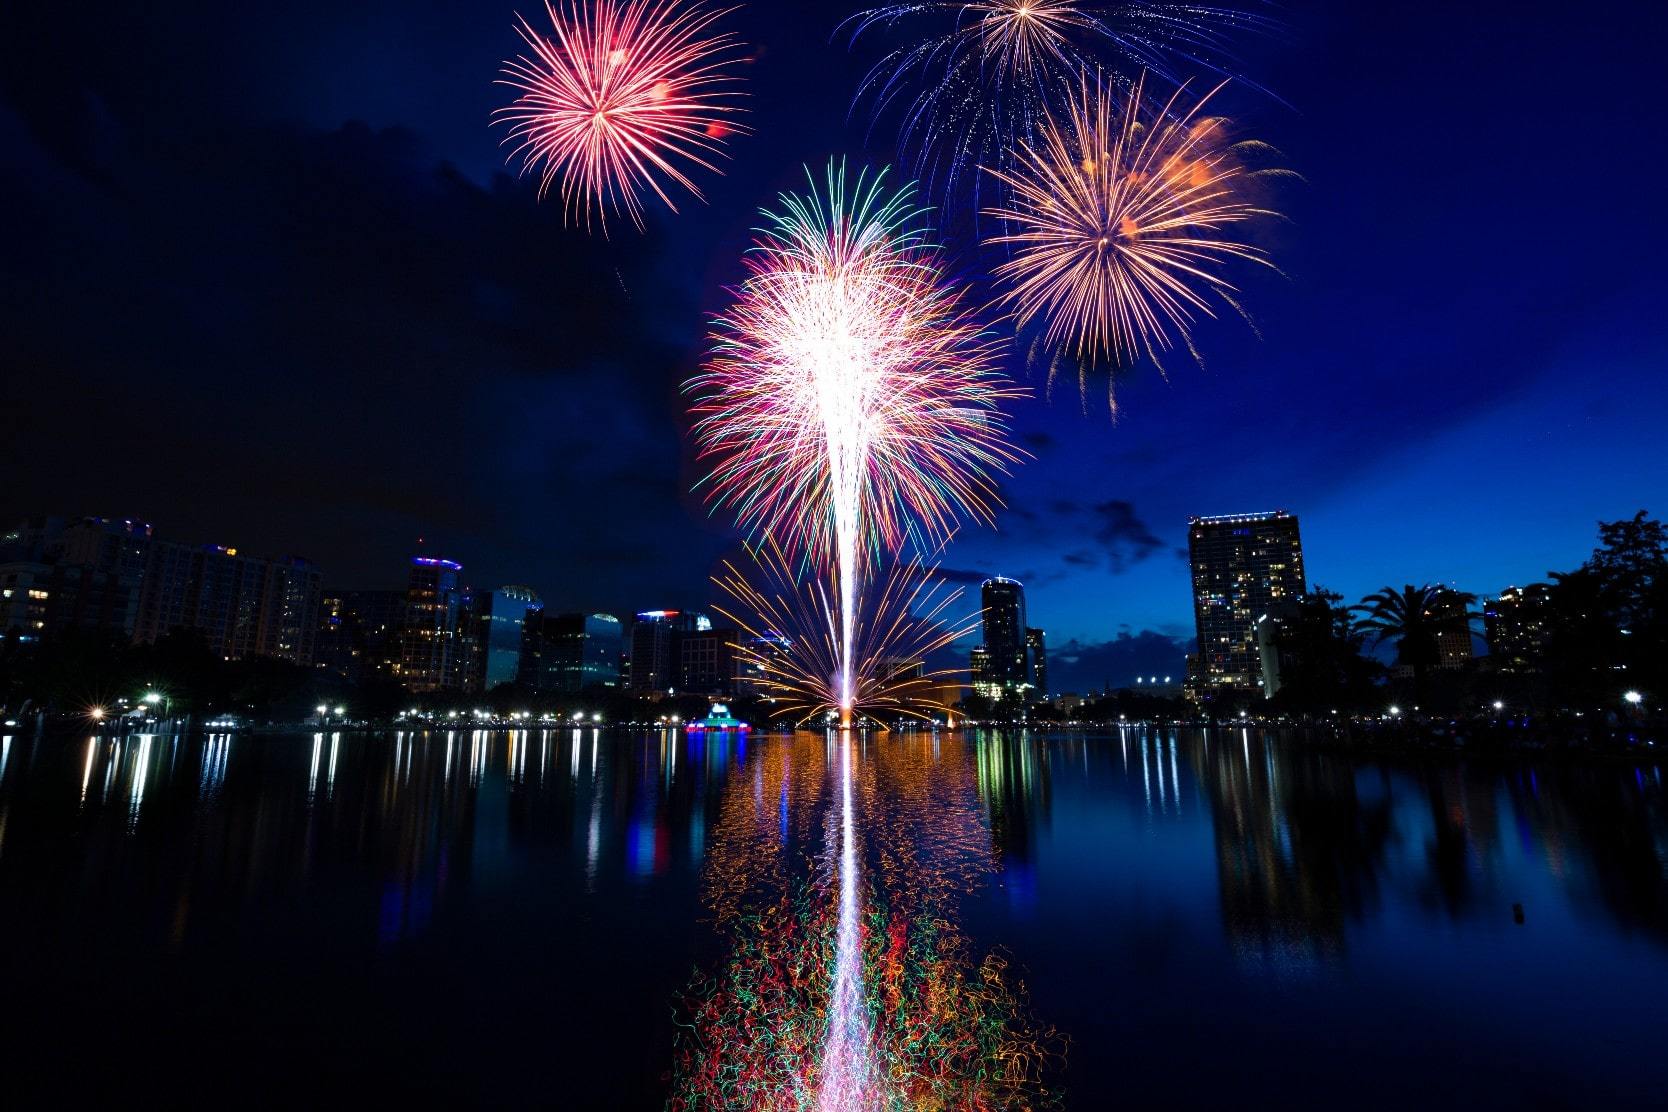 Fireworks over the water for Independence Day in Orlando